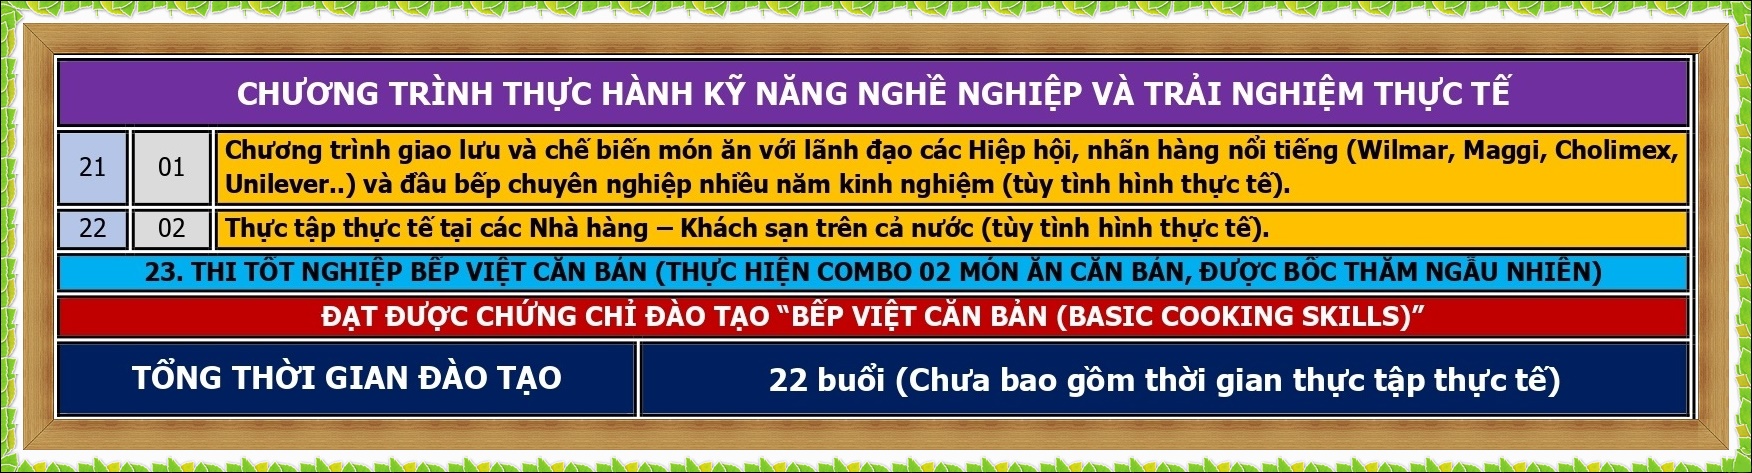 CT DAO TAO BEP VIET CAN BAN_page-0003